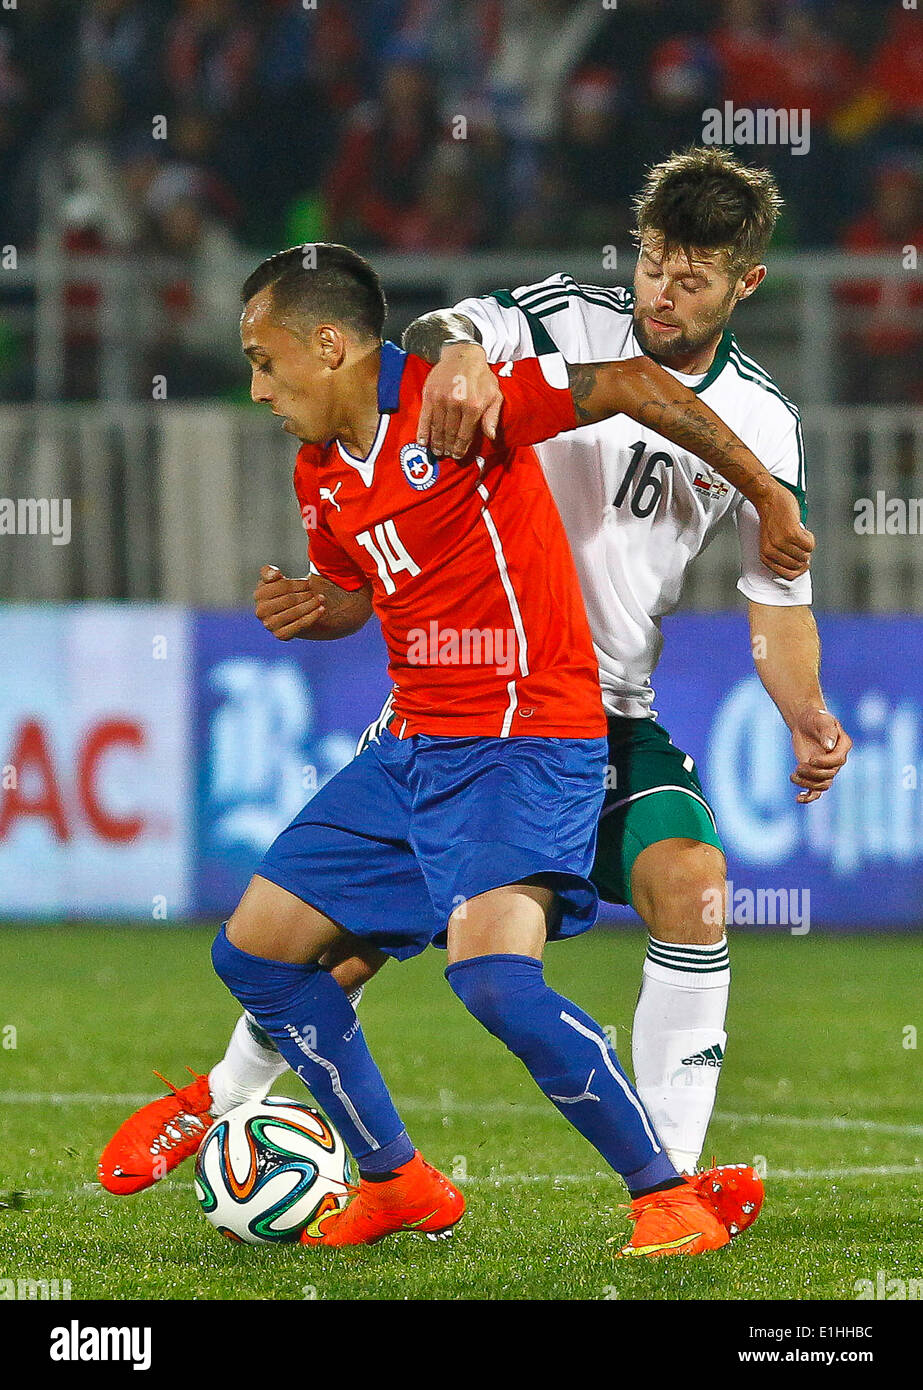 Valparaiso, Chile. 4th June, 2014. Chile's Fabian Orellana (L) vies for the ball with Oliver Norwood of Northern Ireland during a friendly match prior to the 2014 FIFA World Cup, held at Elias Figueroa Brander Stadium, in Valparaiso, Chile, on June 4, 2014. © Str/Xinhua/Alamy Live News Stock Photo